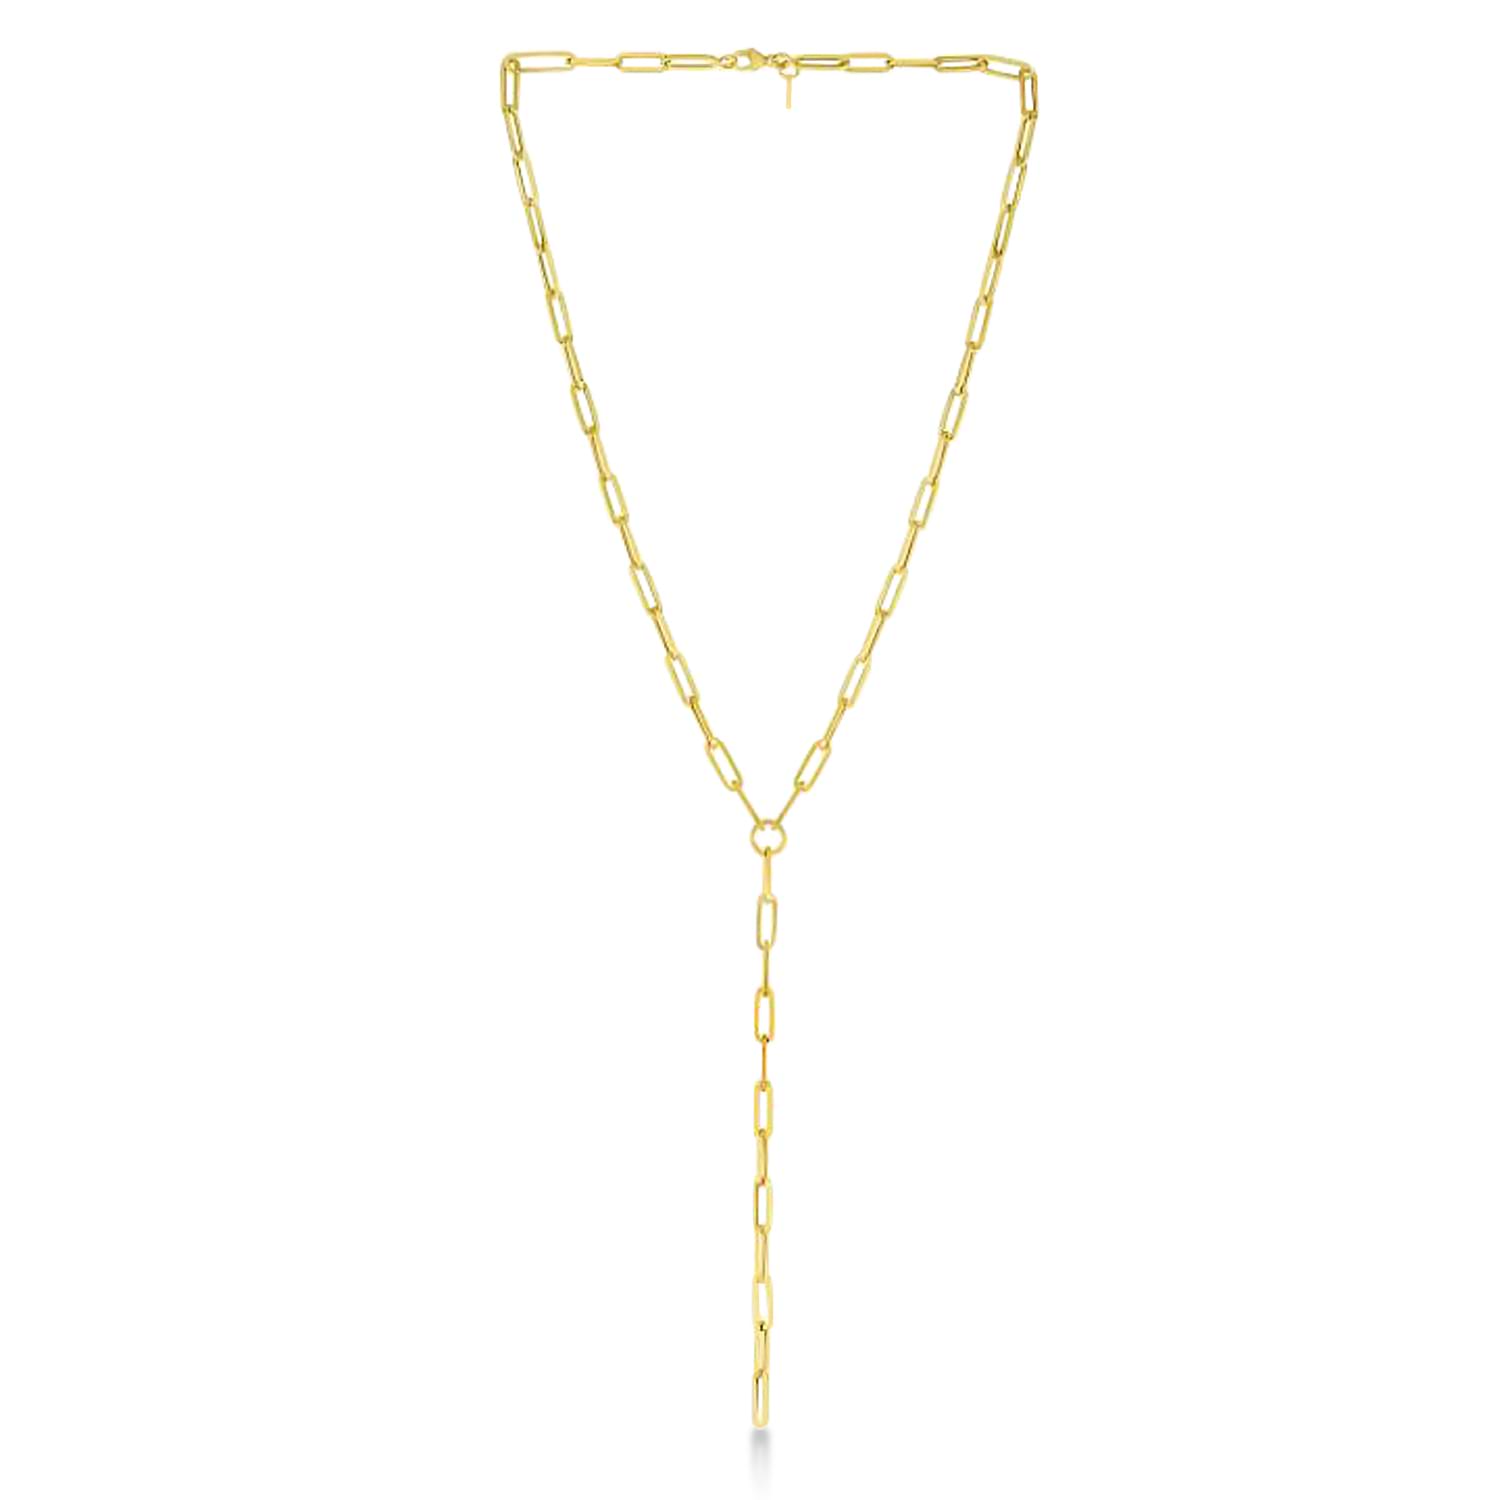 Lariat Paperclip Link Y-Shaped Chain Necklace 14k Yellow Gold